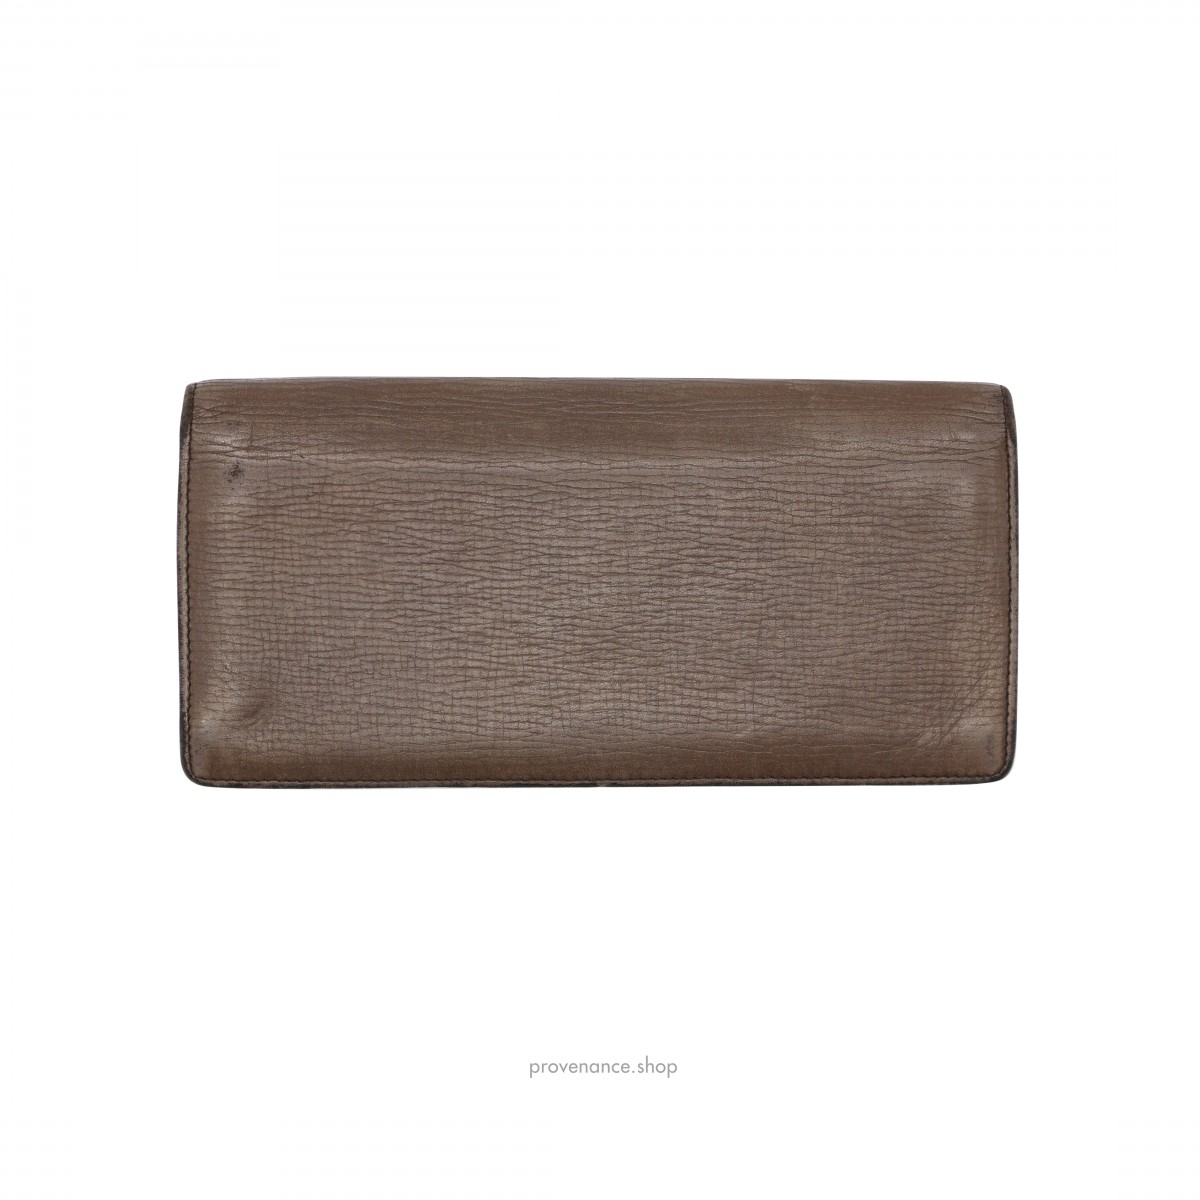 Cartier Long Wallet - Taupe Leather - 2